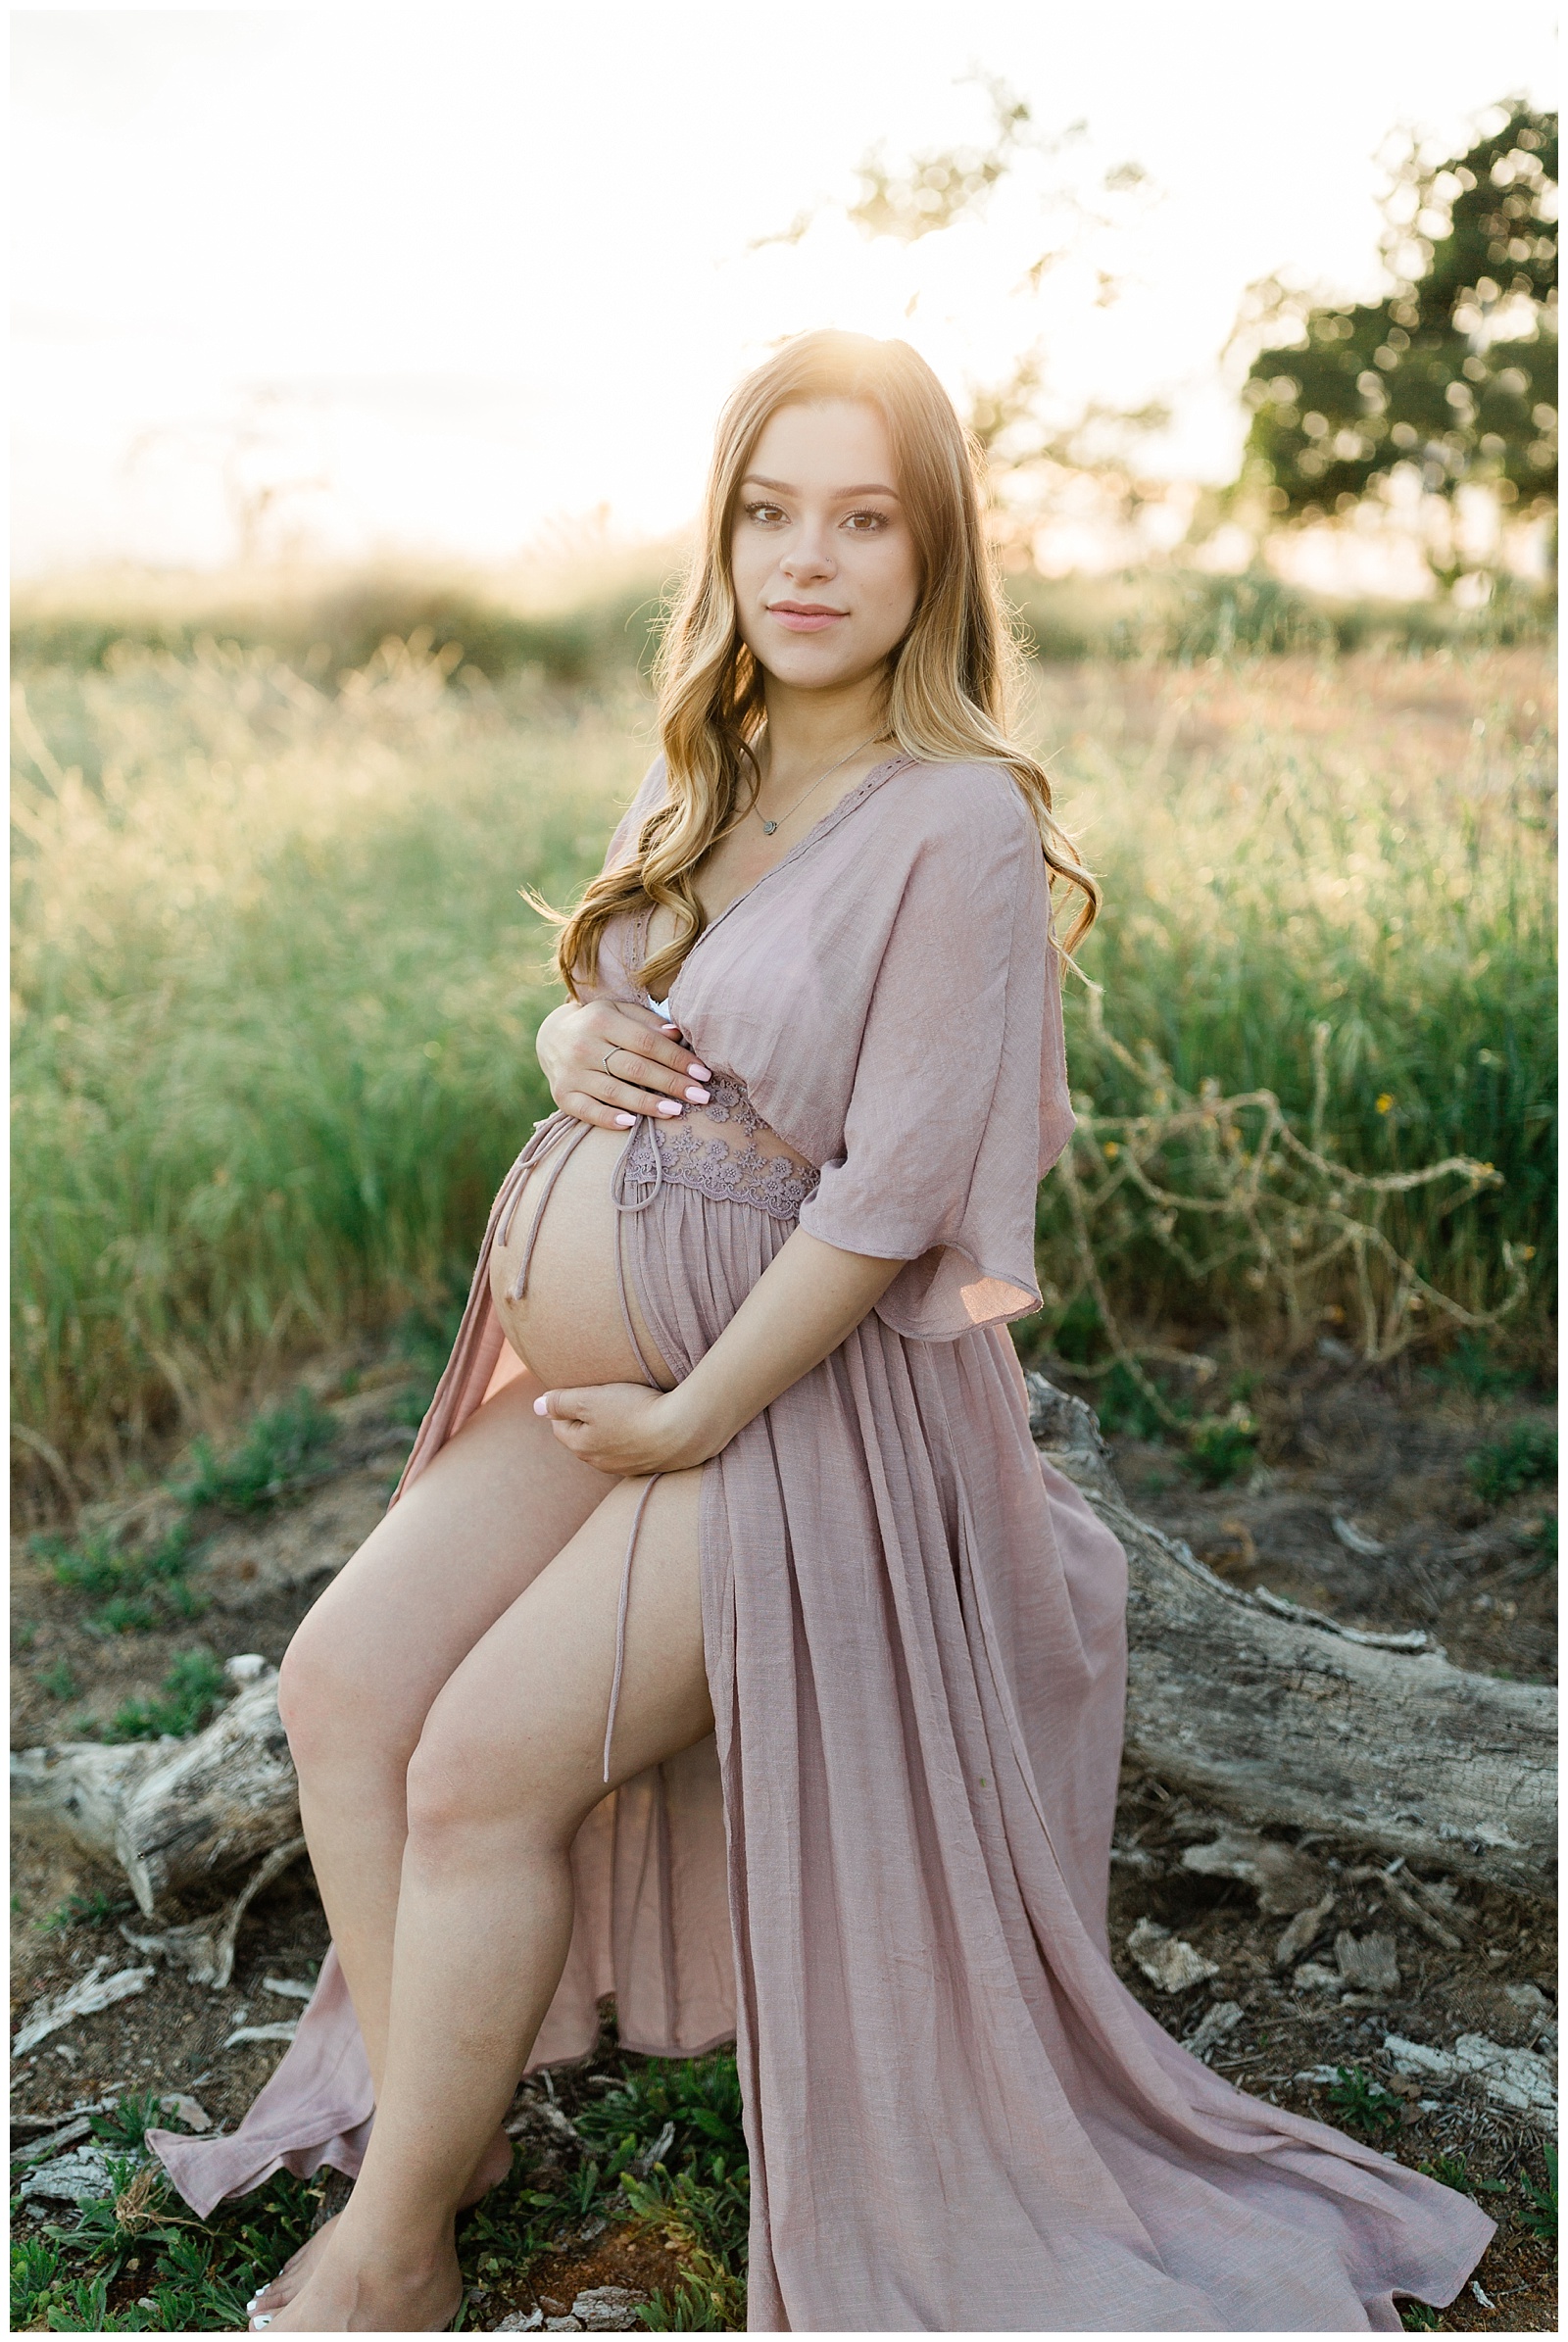  pregnant woman in a grassy field and sunset wearing a blush pink open belly dress